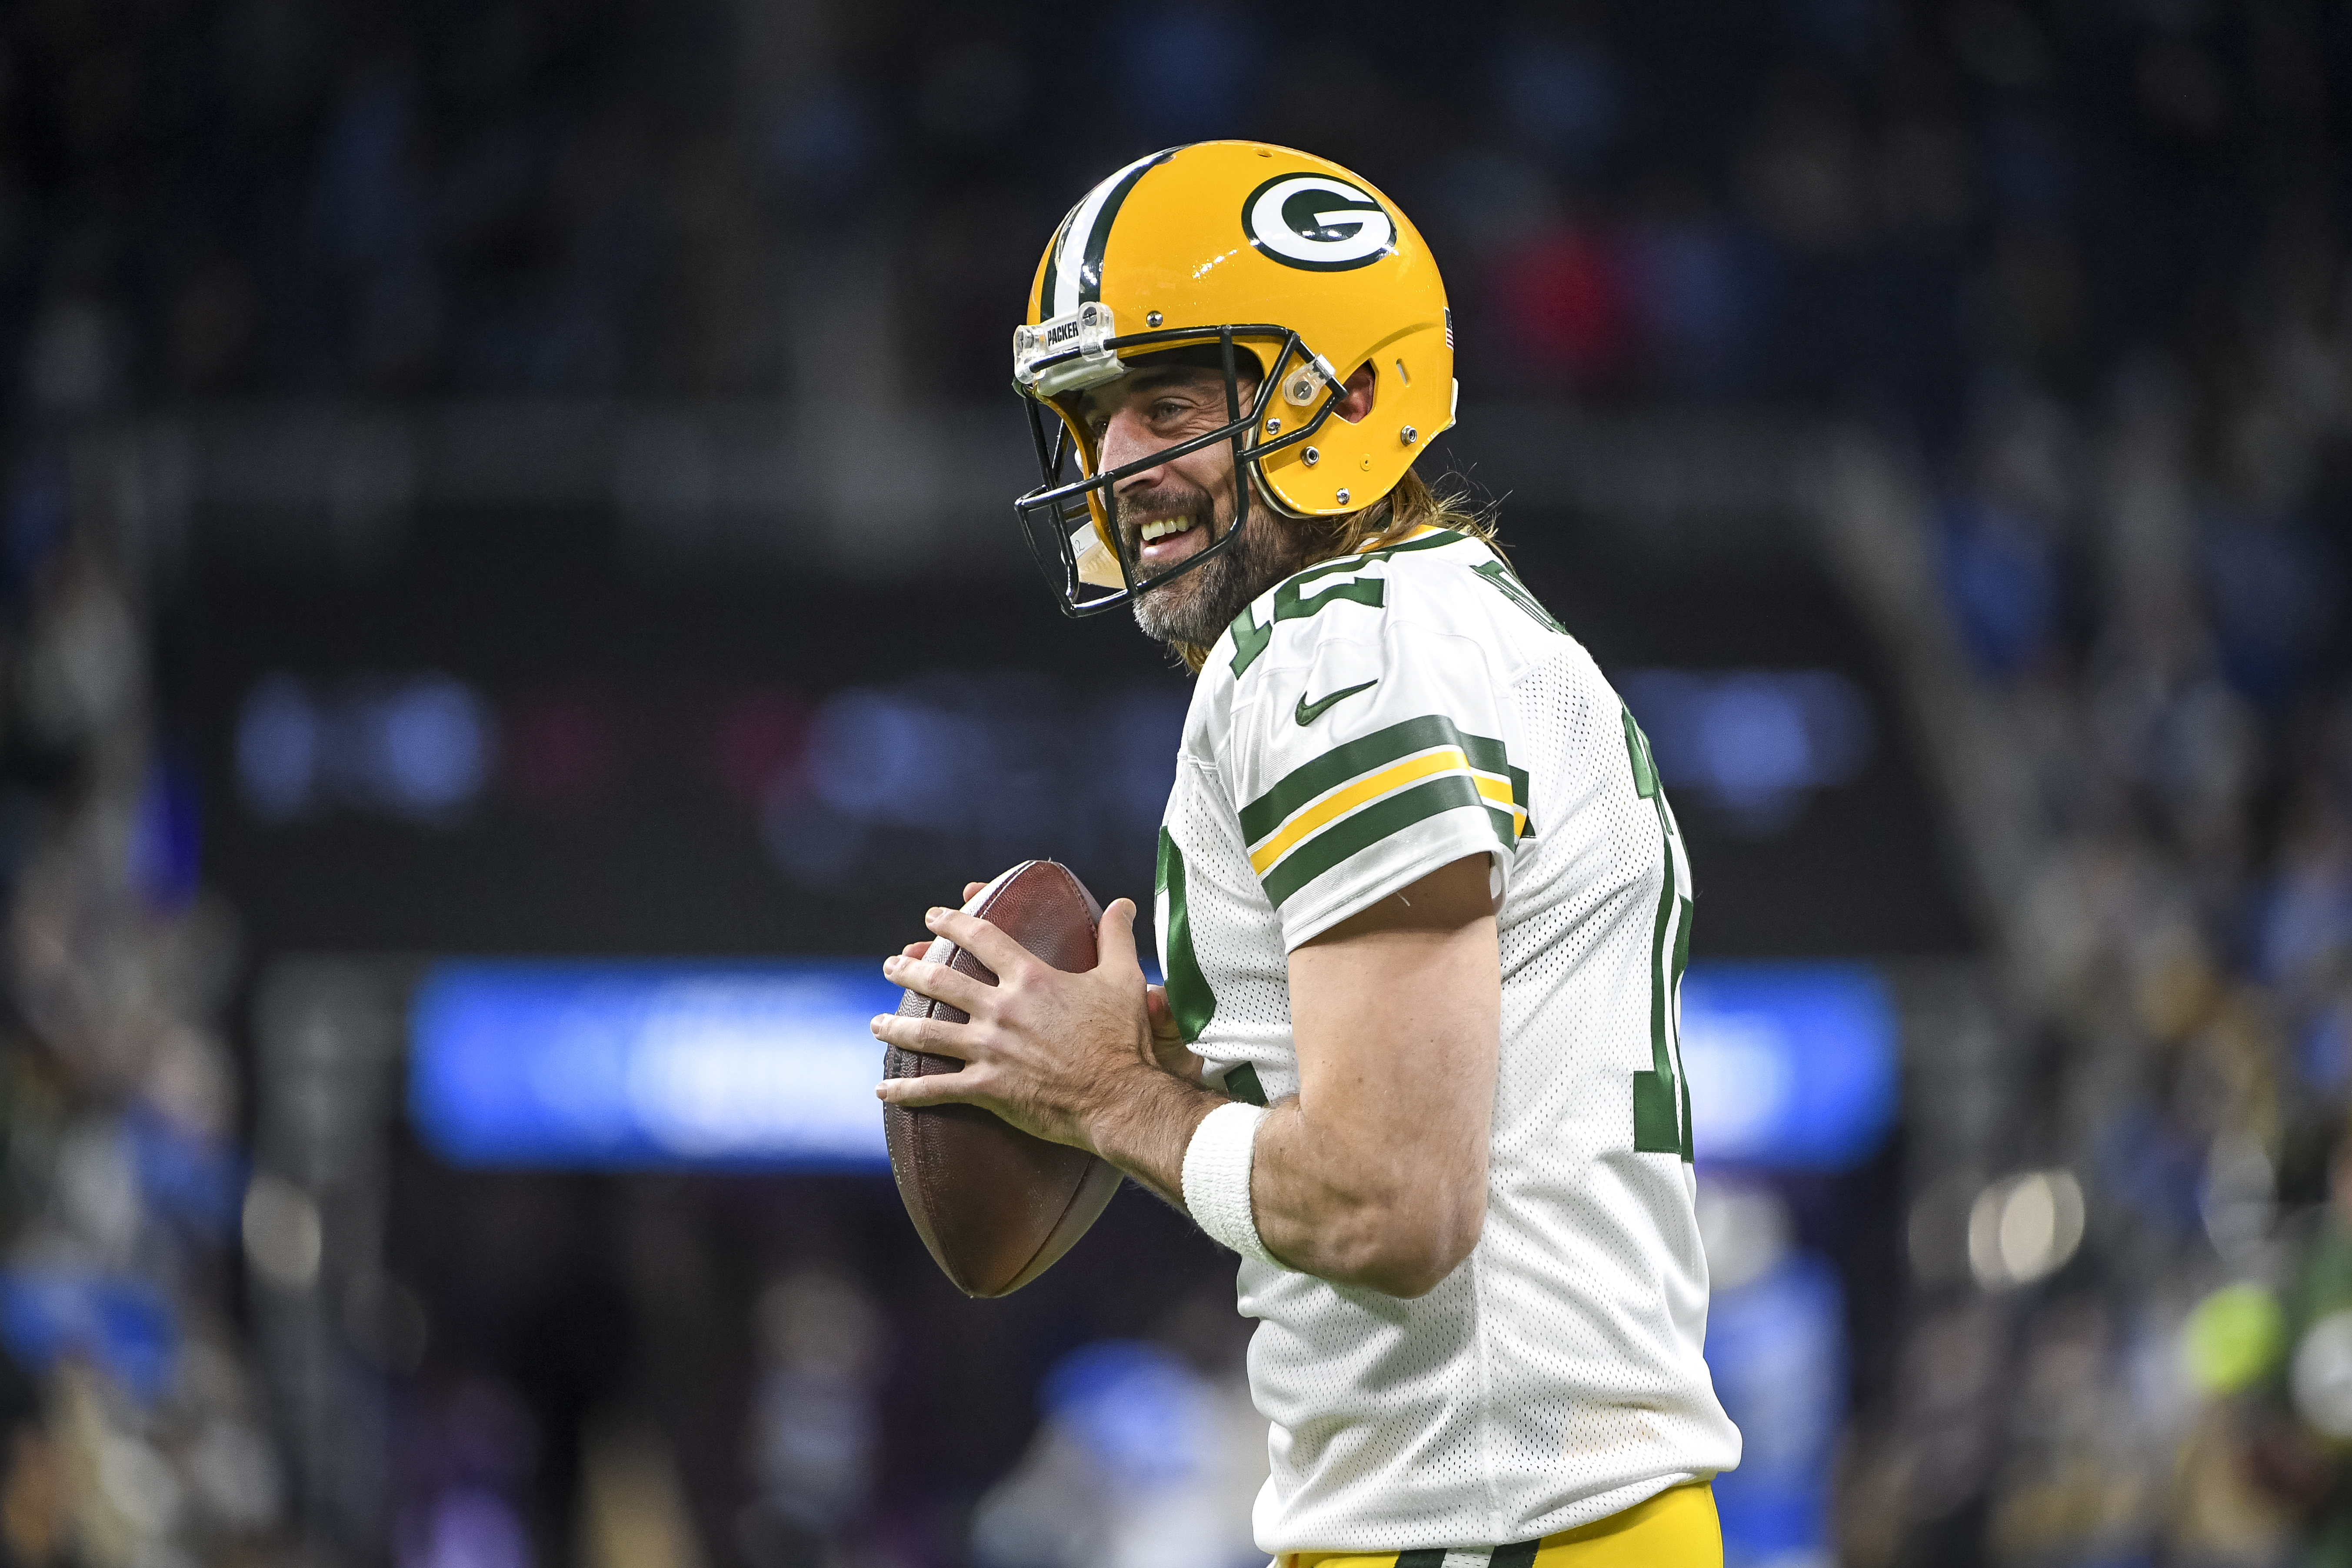 Aaron Rodgers #12 of the Green Bay Packers warms up before the game against the Detroit Lions at Ford Field on January 09, 2022 in Detroit, Michigan.